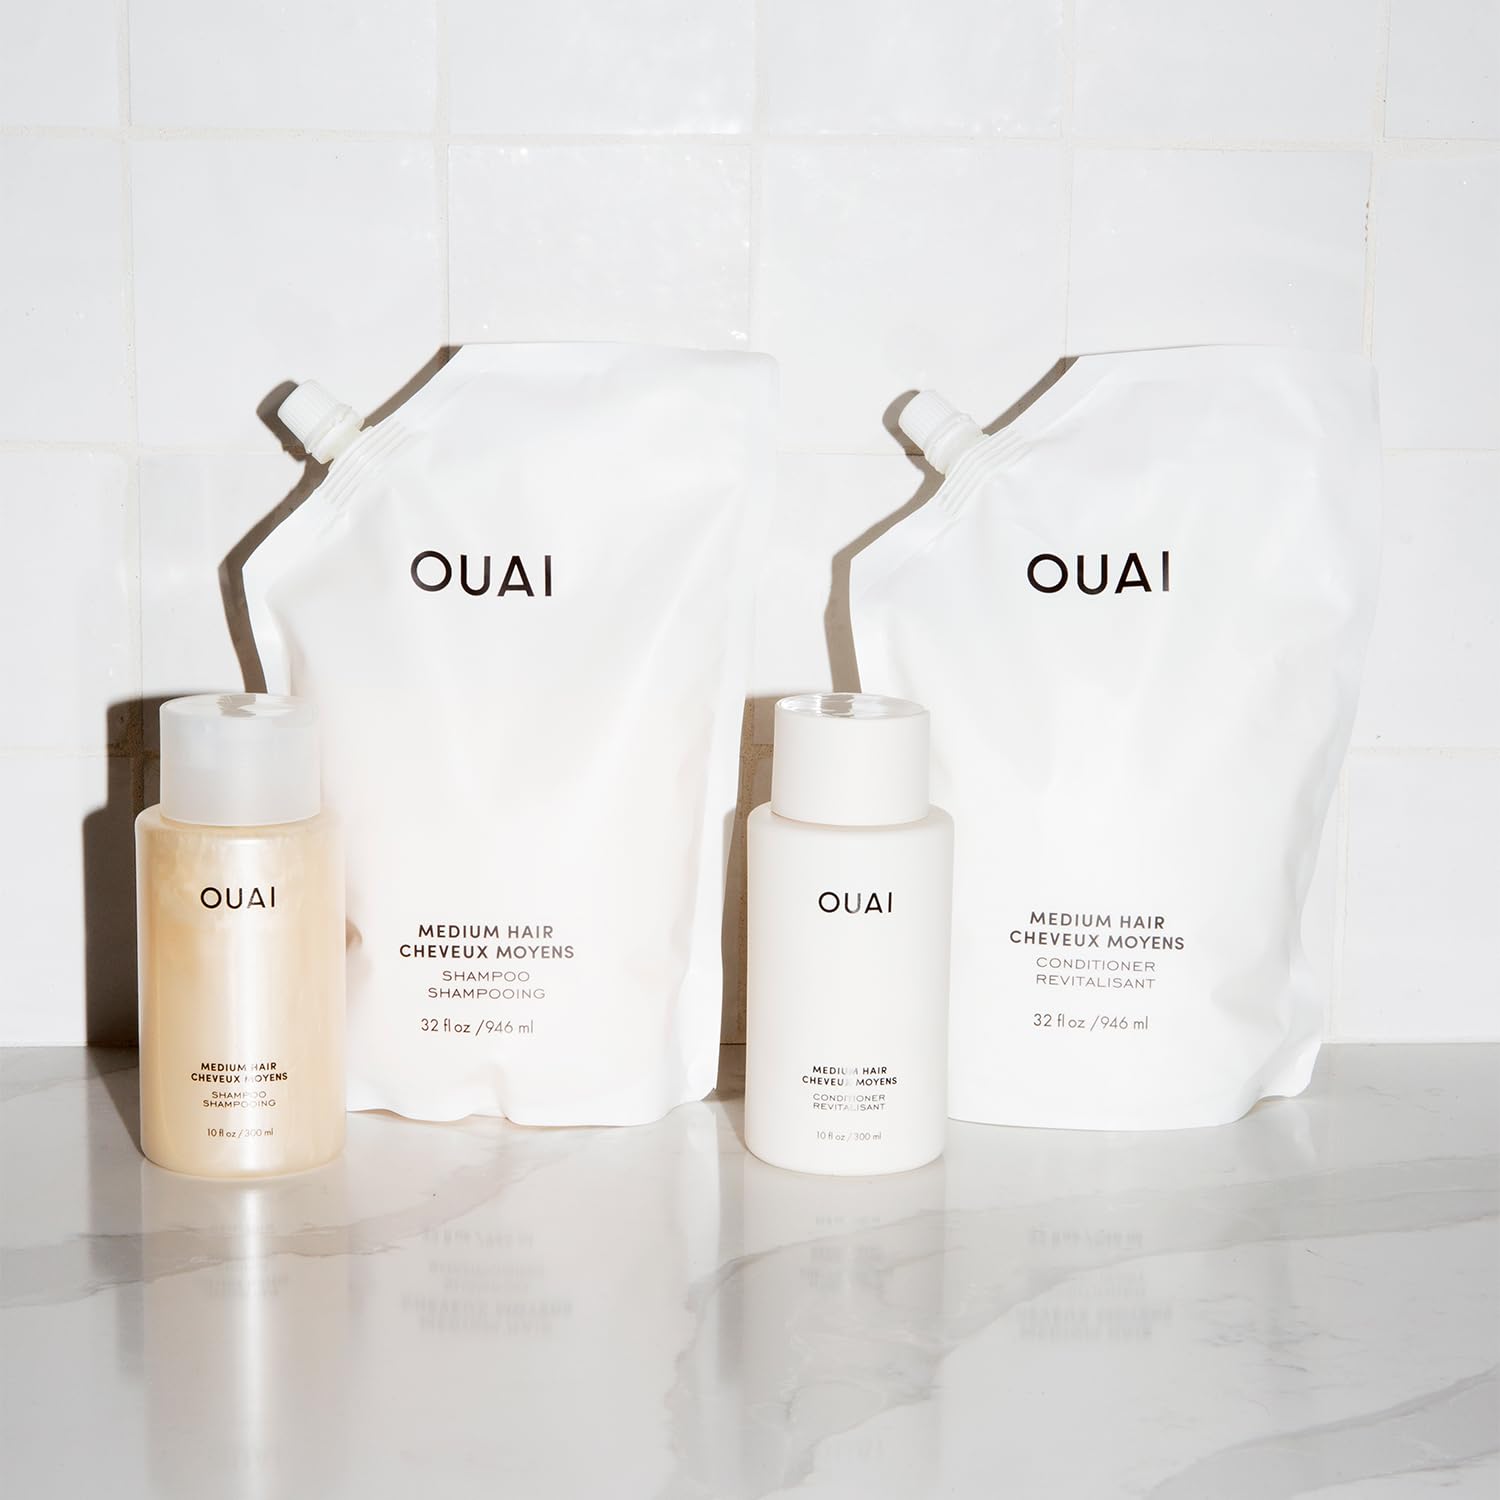 OUAI Medium Shampoo Refill - Hydrating Shampoo with Coconut Oil, Babassu, Kumquat Extract and Keratin - Strengthens, Nourishes and Adds Shine - Paraben, Phthalate and Sulfate Free Hair Care - 32 oz : Beauty & Personal Care